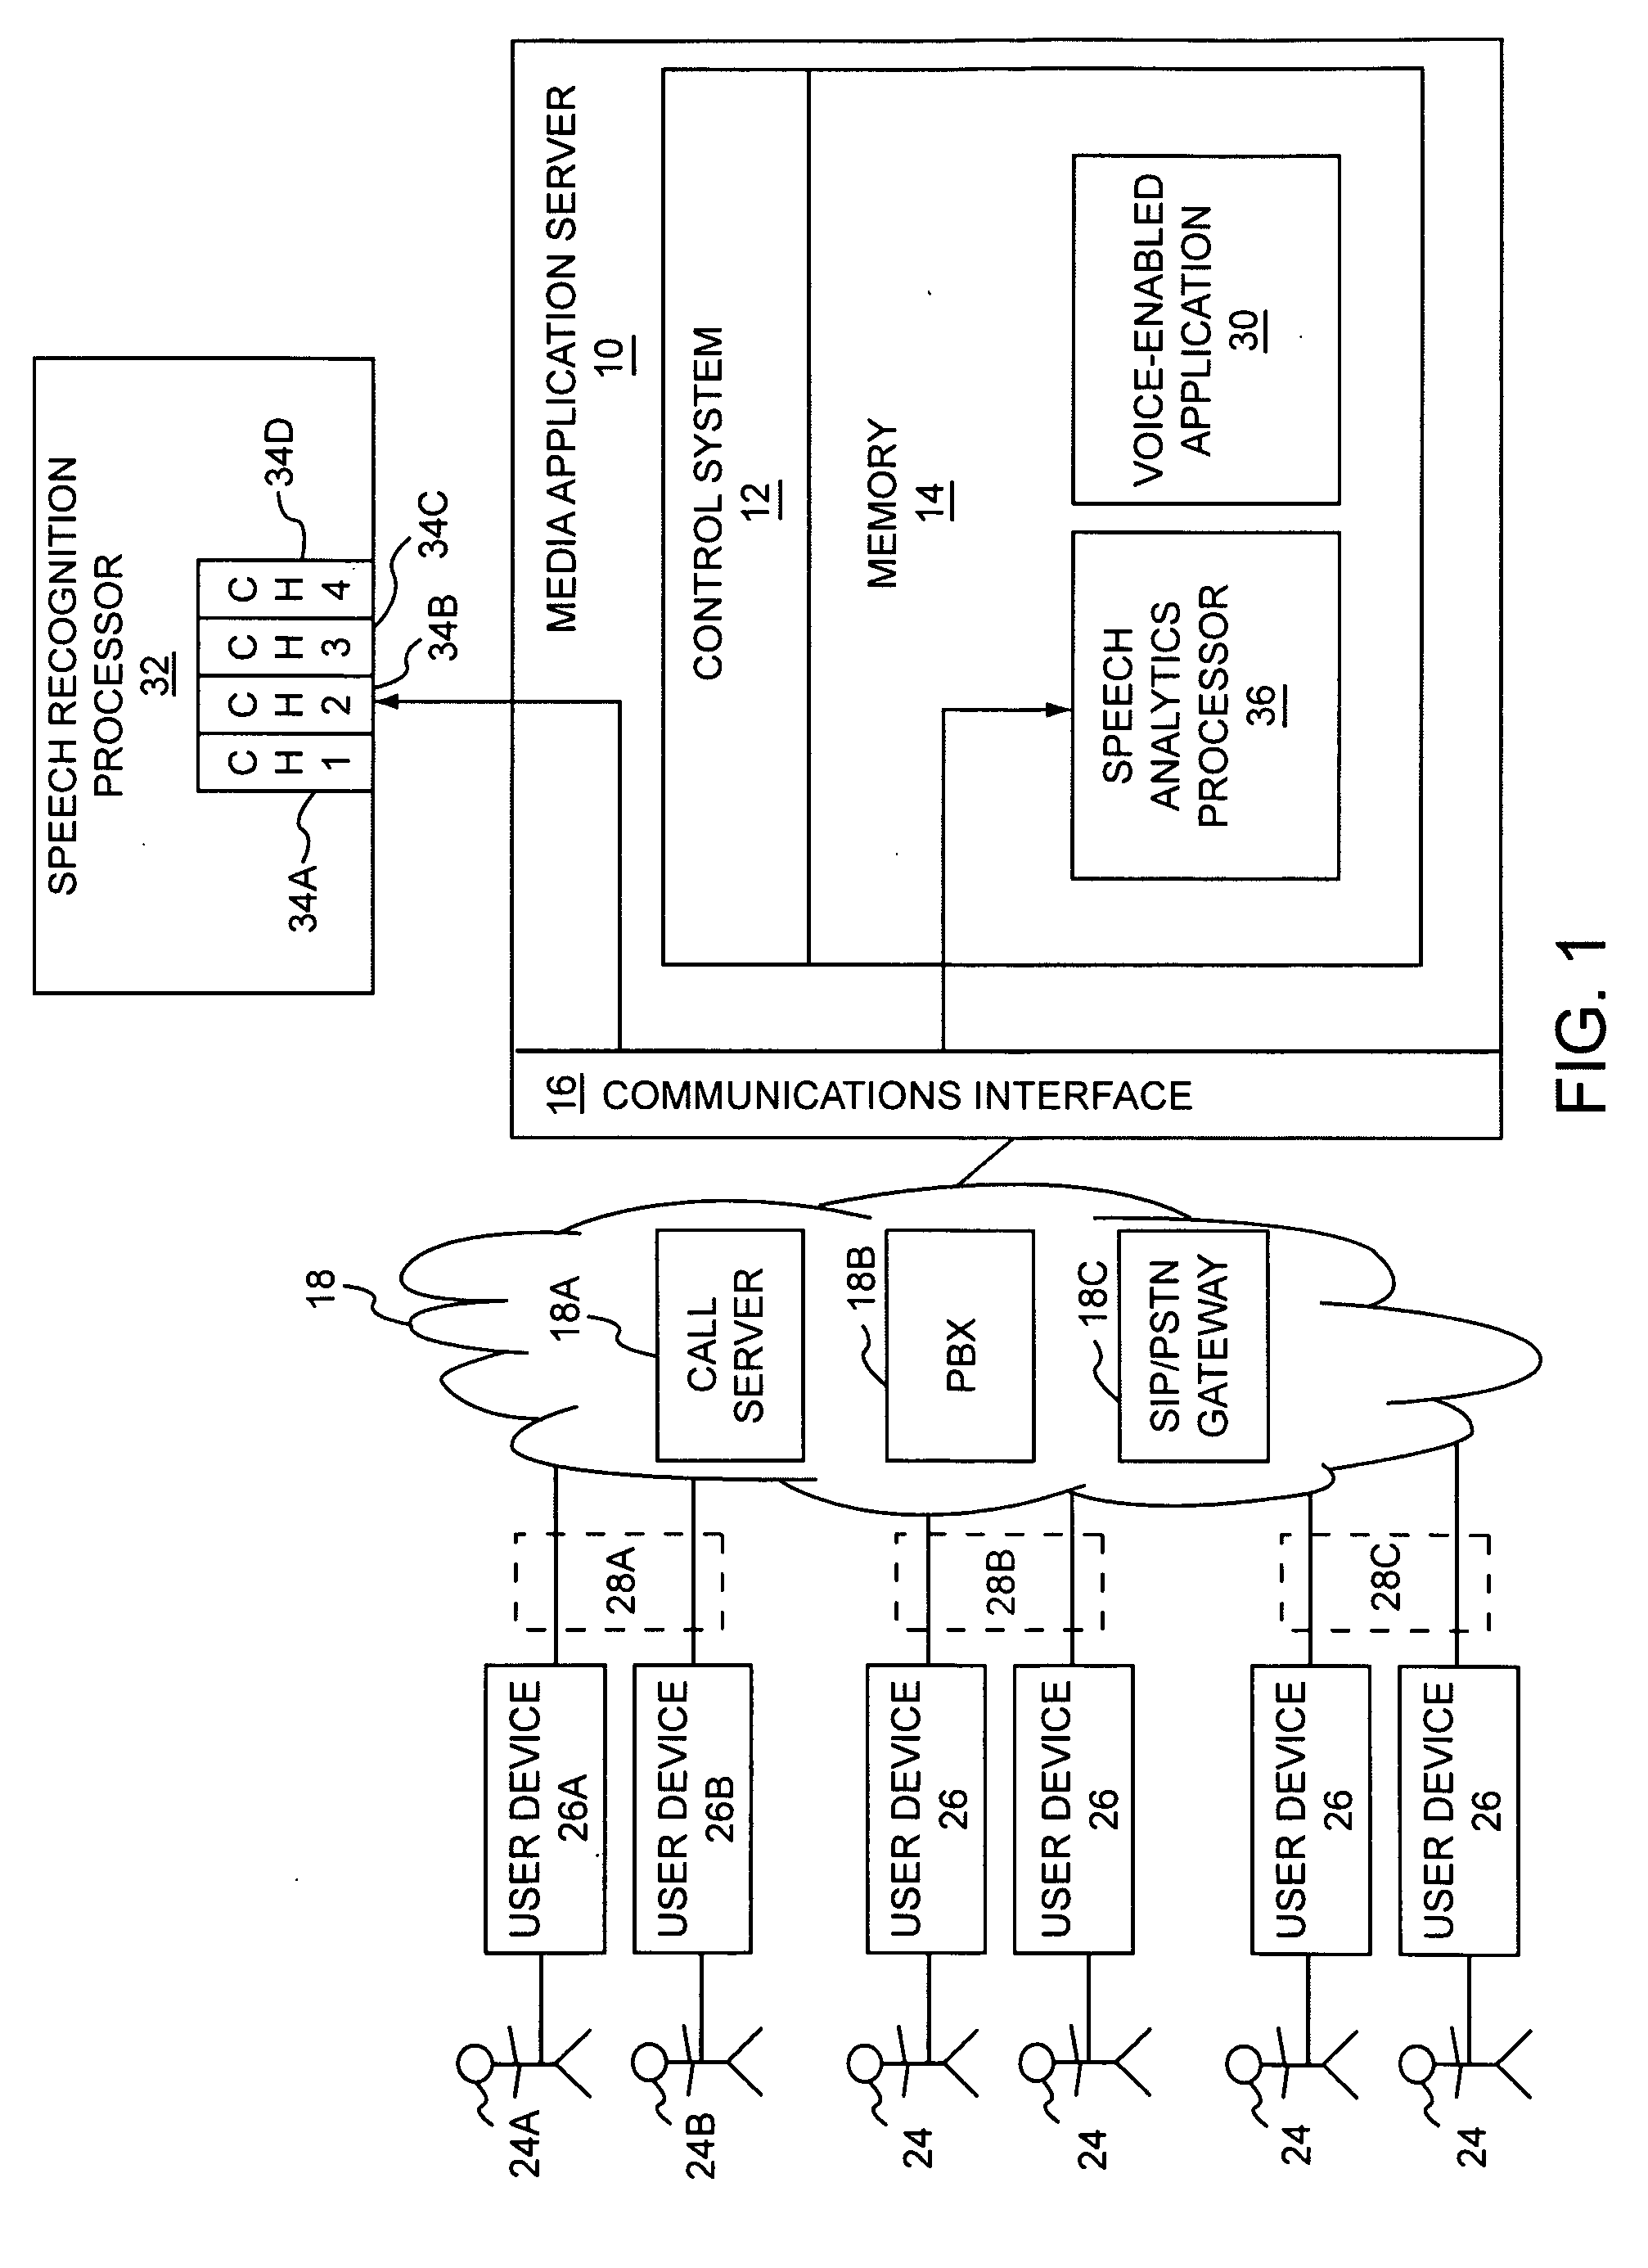 Method and system for detecting a relevant utterance